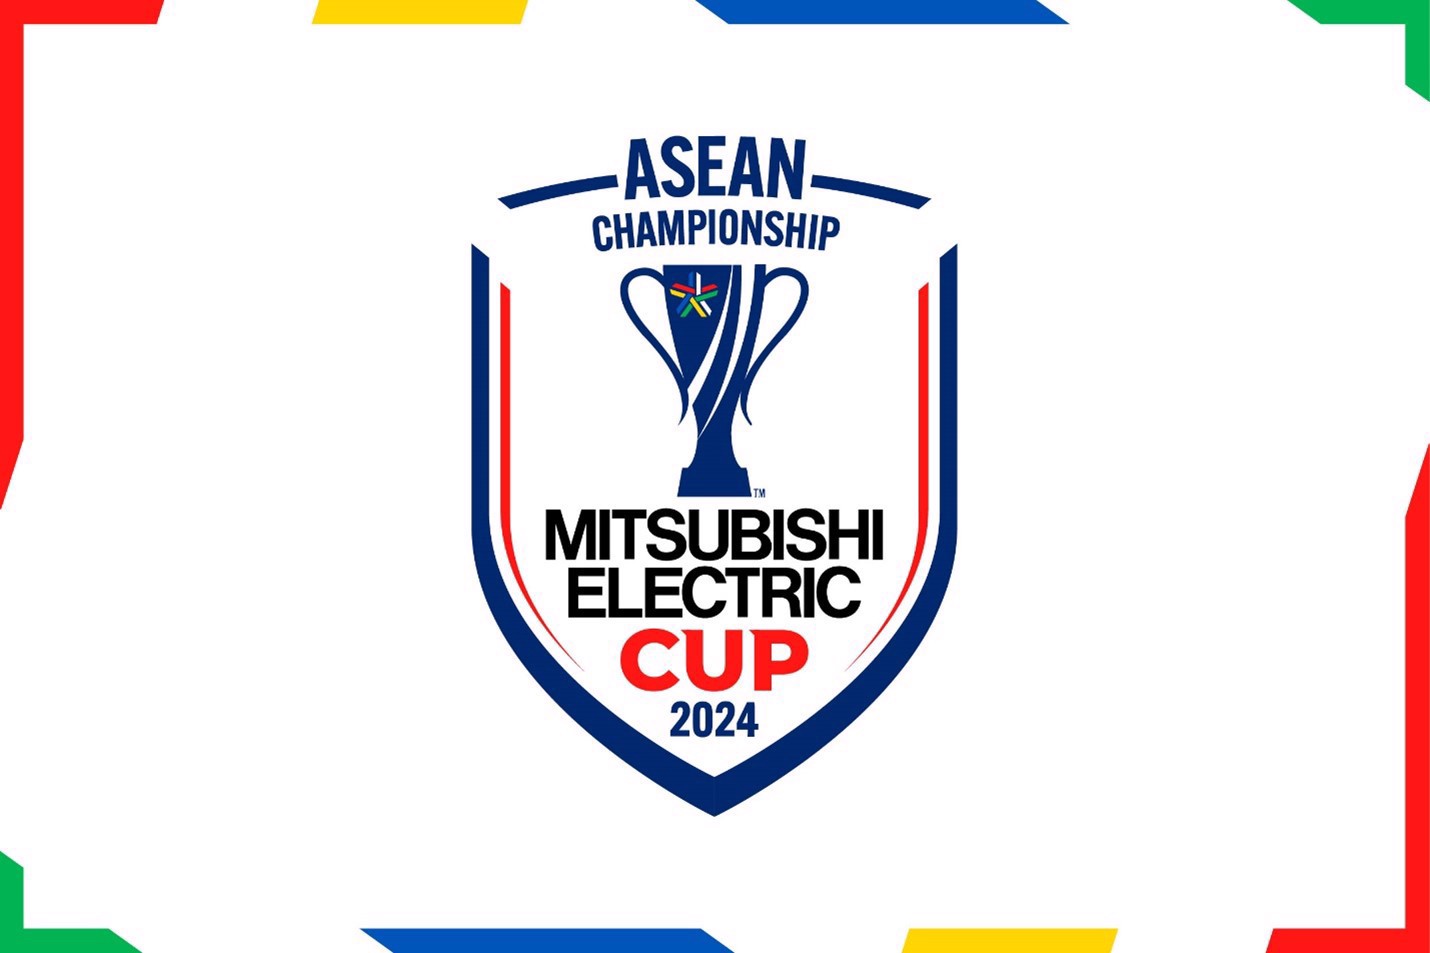 Asean Football Federation (AFF) And Mitsubishi Electric Launch New Brand Identity For Asean Mitsubishi Electric Cup™ 2024